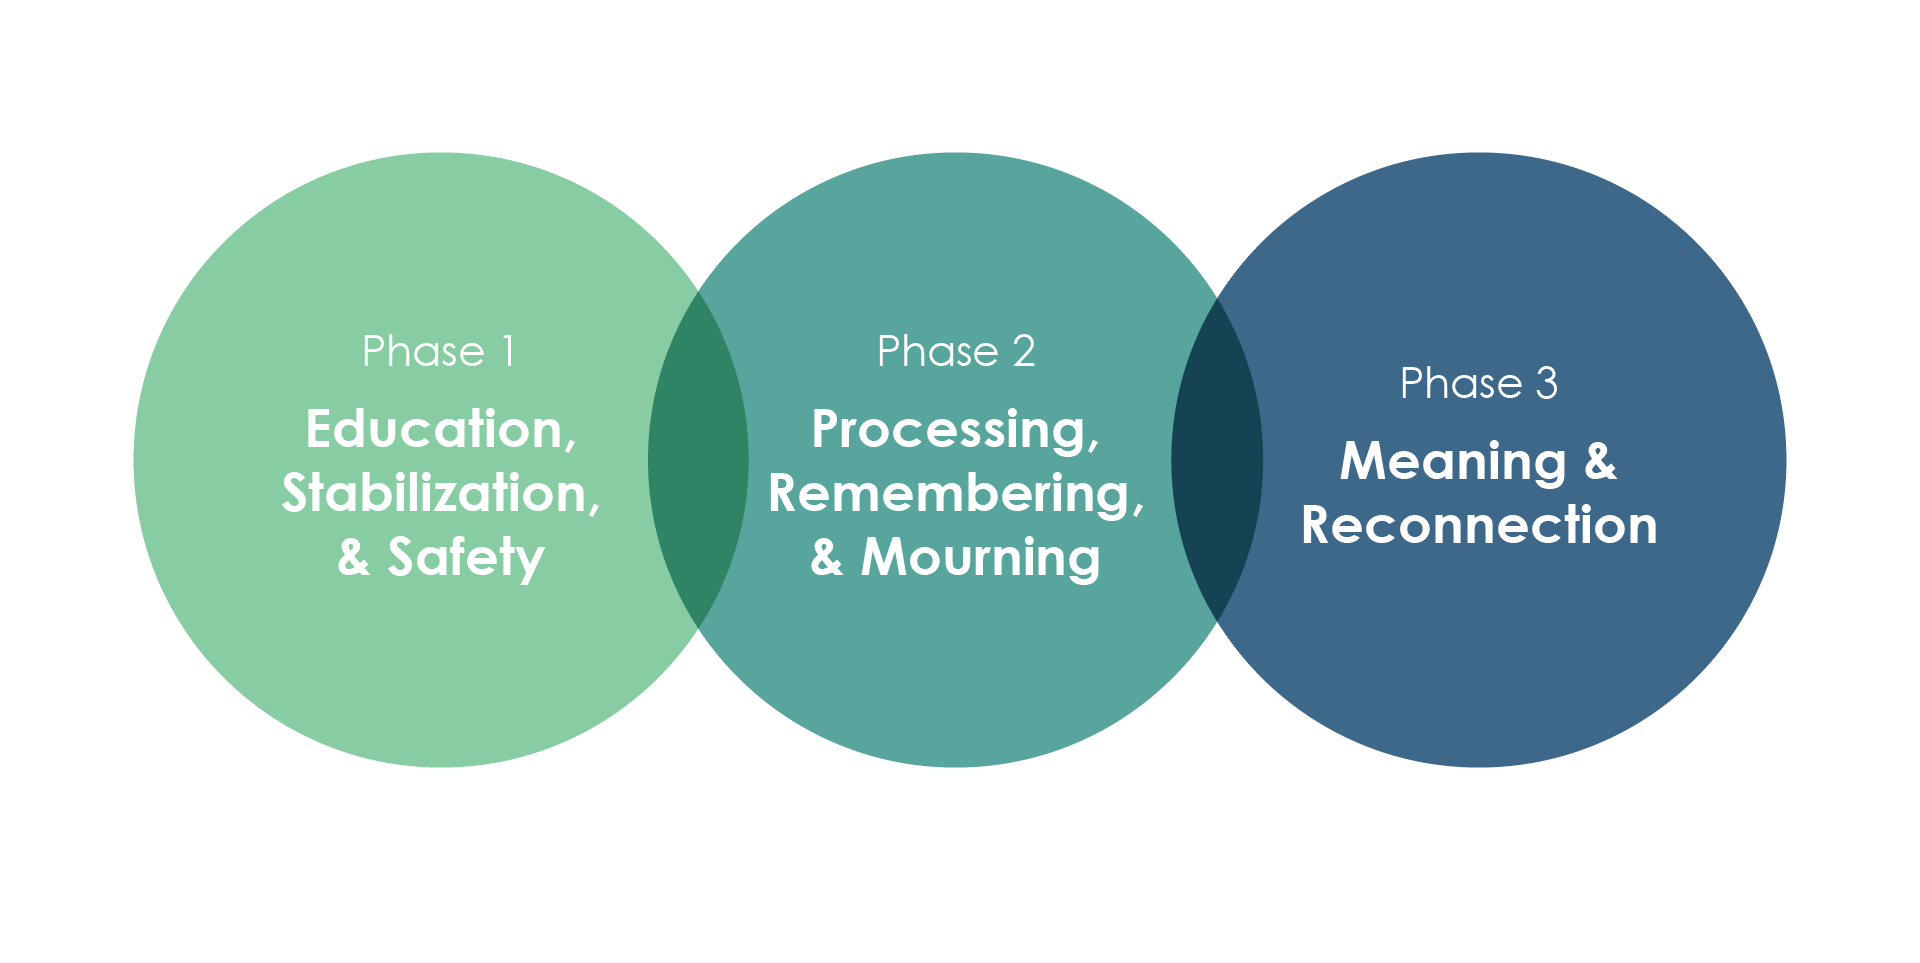 Triphasic Model: Phase one: Education, stablization and safety, Phase two: Processing, remembering, & mourning, Phase three: Meaning & reconnection